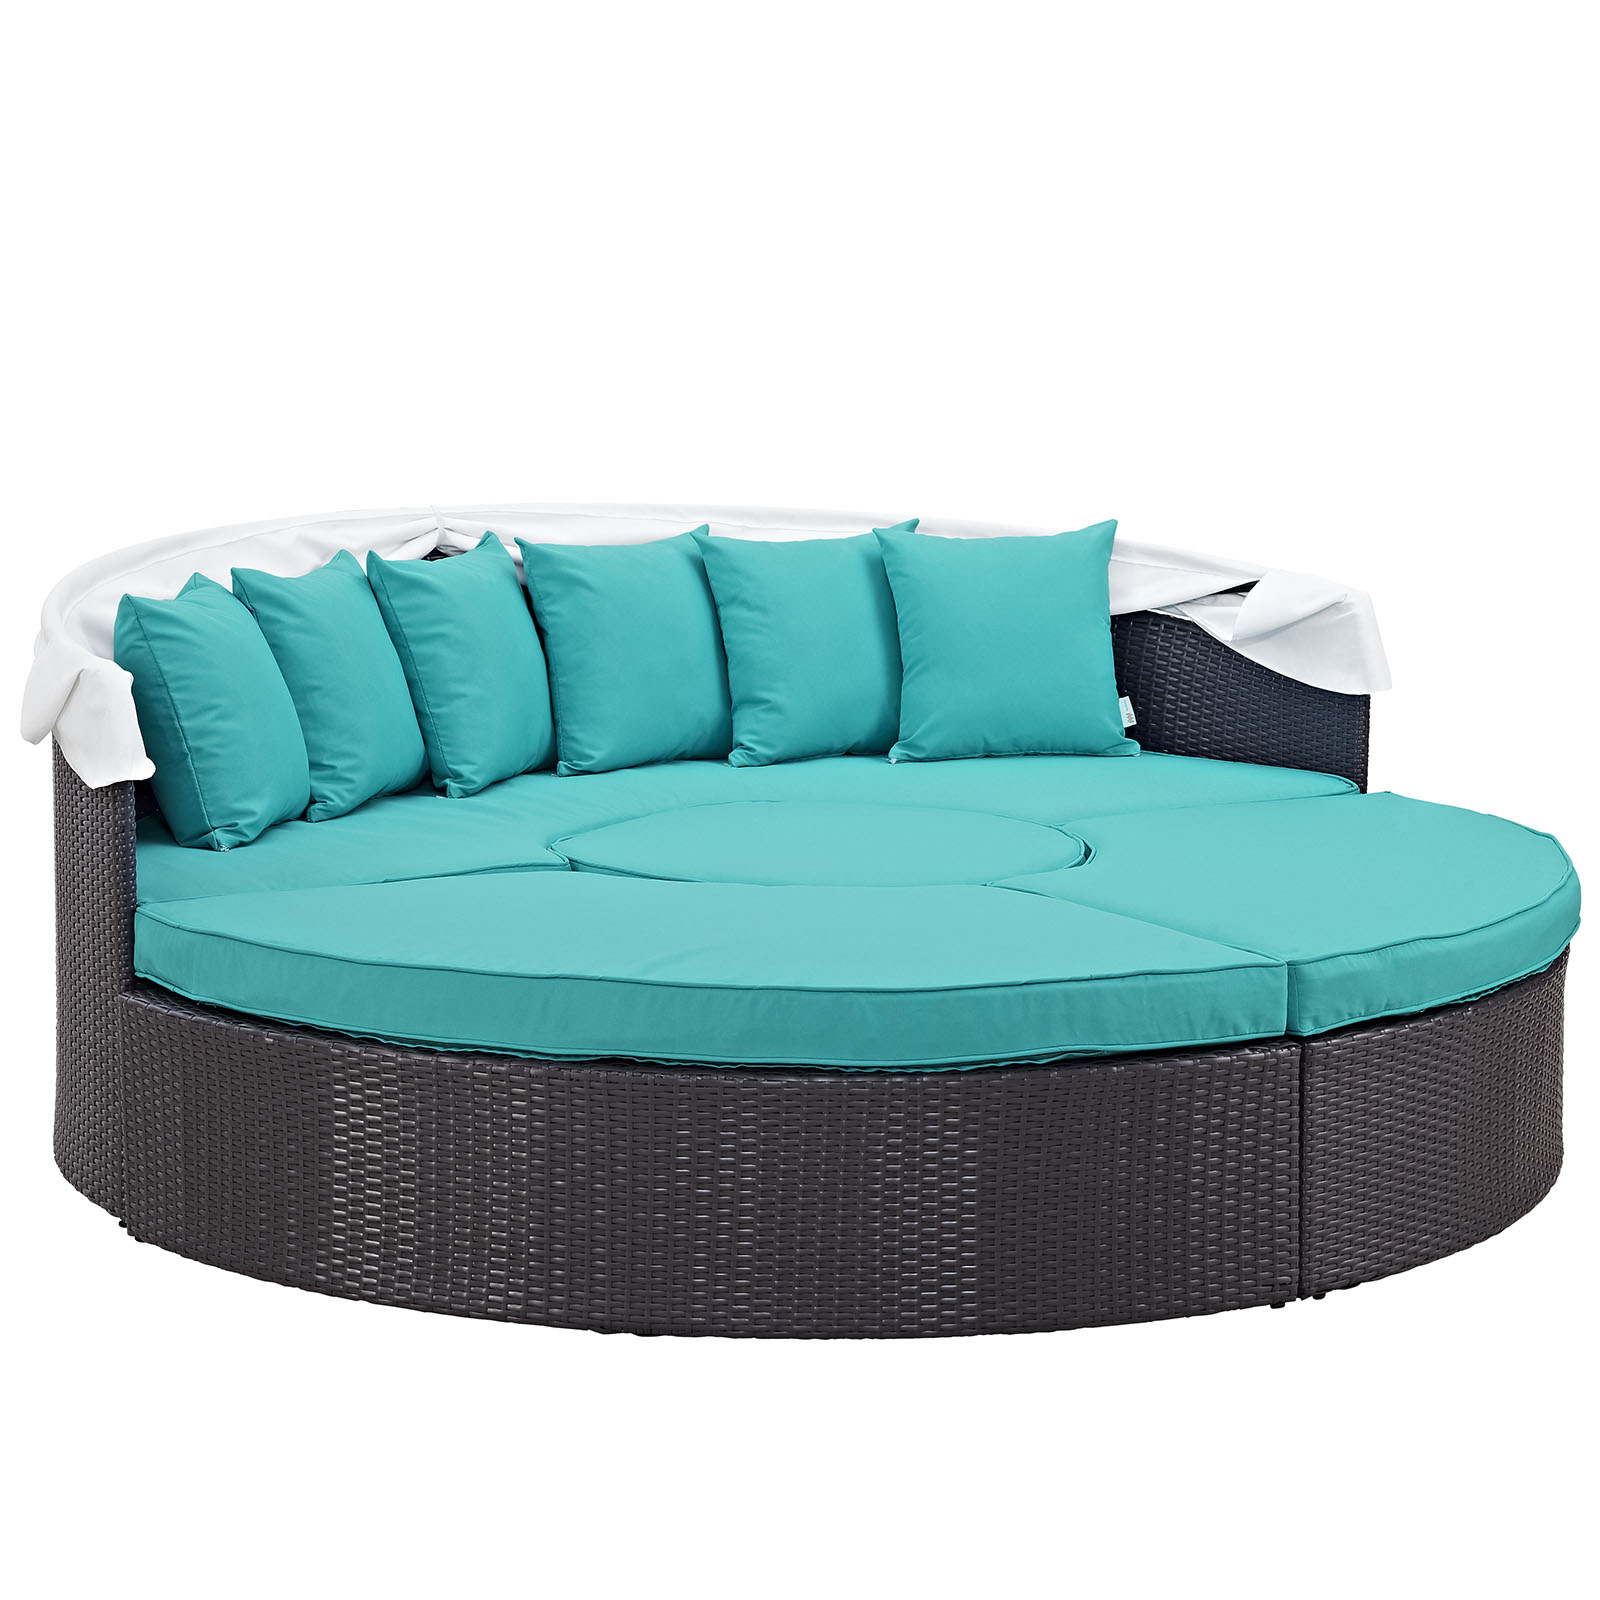 Modway Convene Canopy Outdoor Patio Daybed in Espresso Turquoise - image 4 of 6